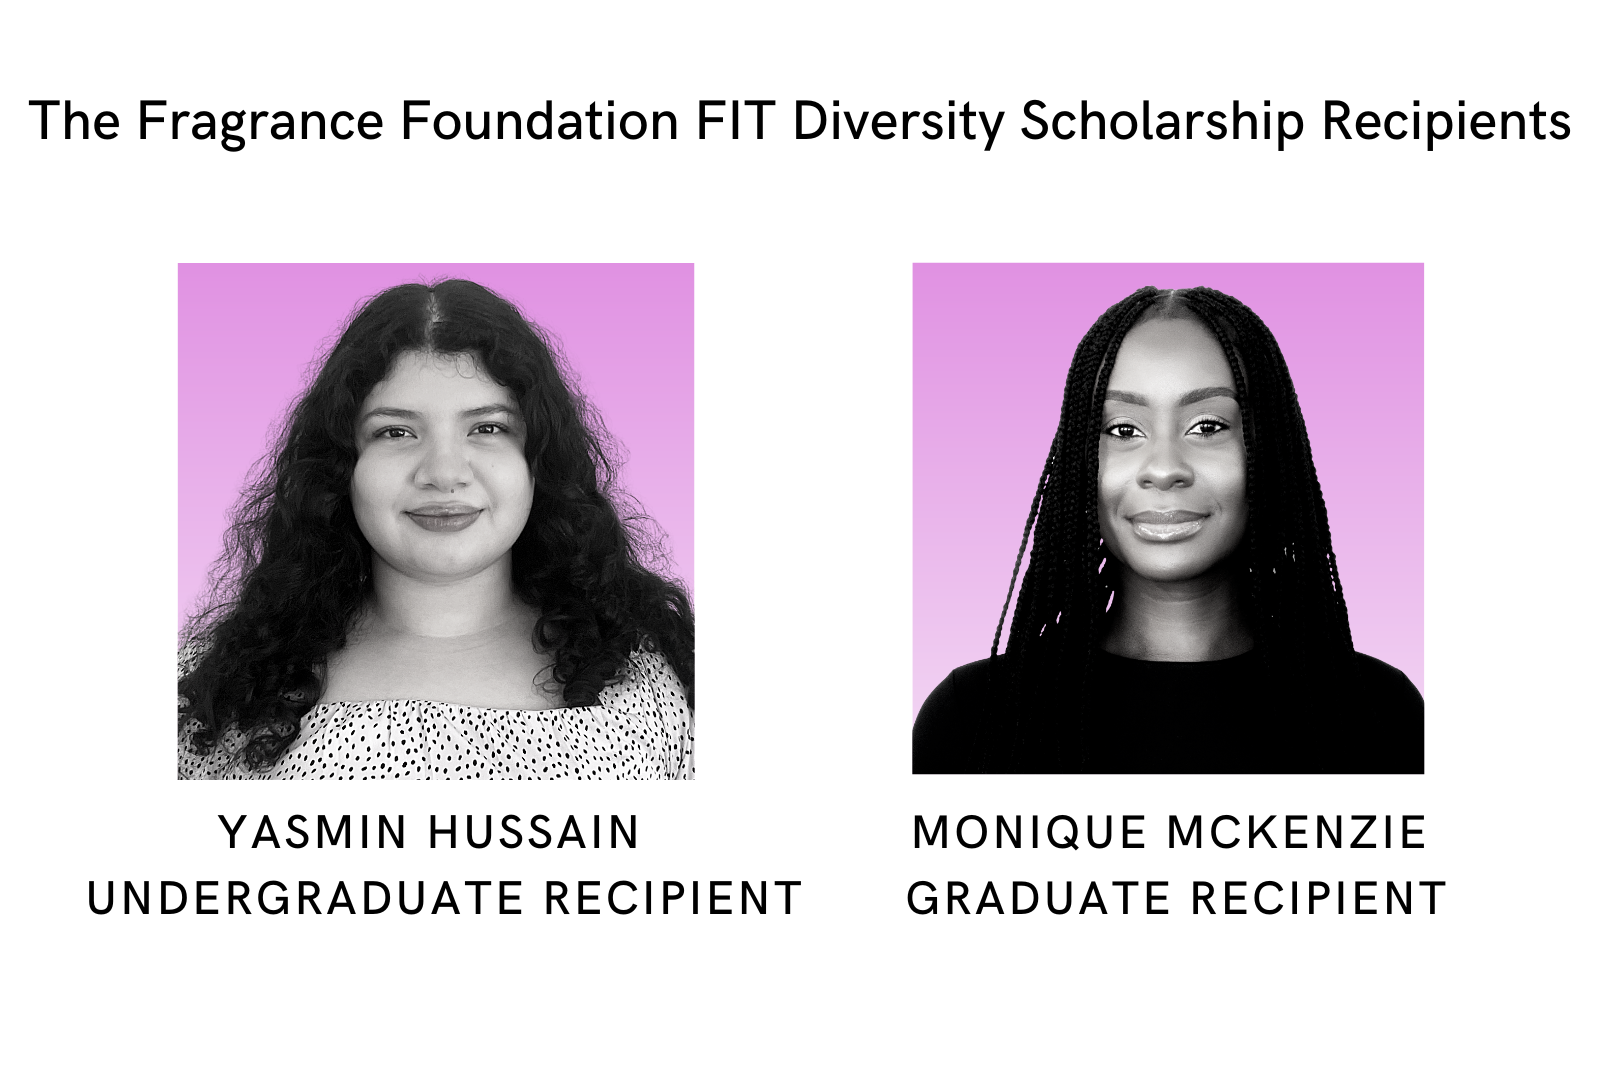 SCENTS AND SENSIBILITY: MEET THE 2022 TFF FIT DIVERSITY SCHOLARSHIP RECIPIENTS